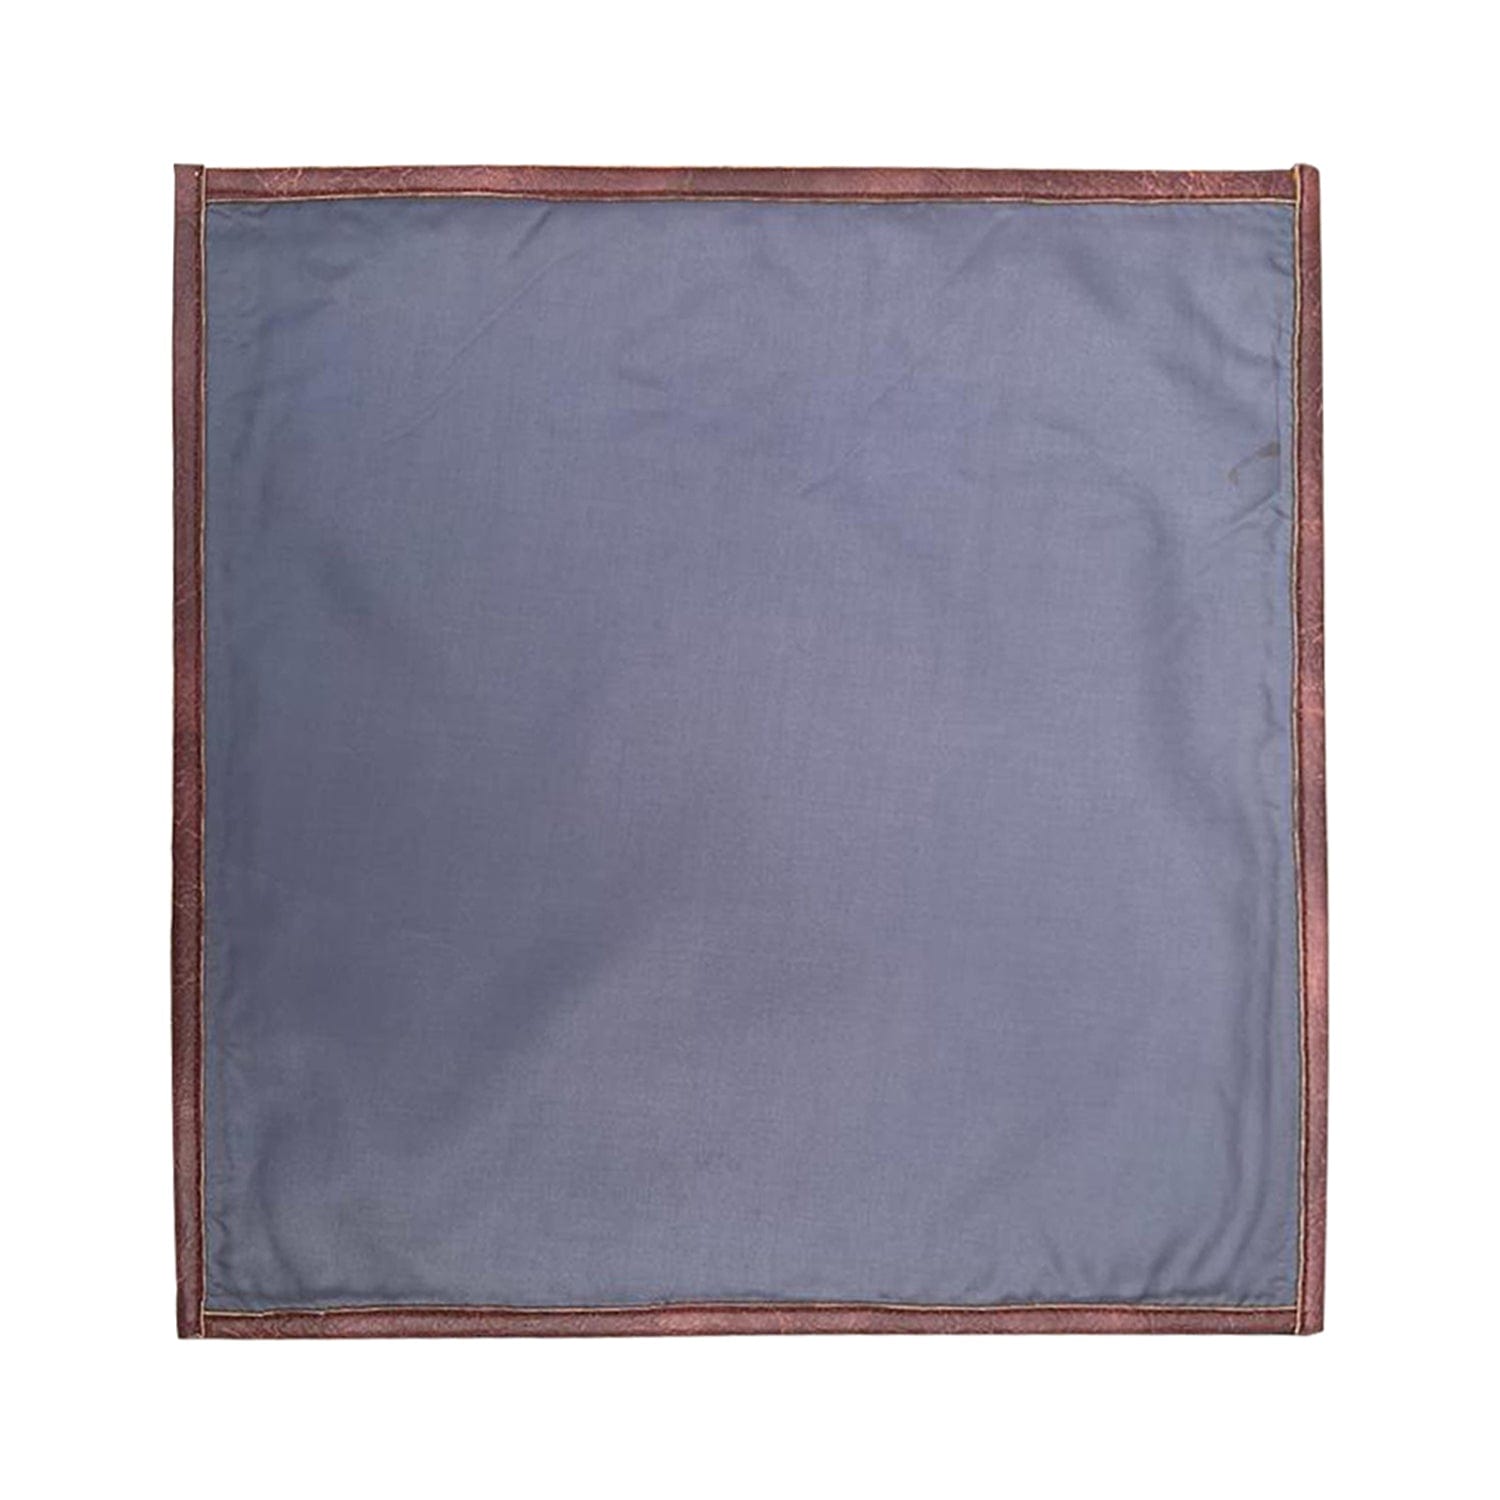 Mona B Set of 2 Printed Placemats, 13 INCH Square, Best for Bed-Side Table/Center Table, Dining Table/Shelves- PP-100 - Placemat by Mona-B - Backpack, Flat30, New Arrivals, Sale, Shop1999, Shop2999, Shop3999